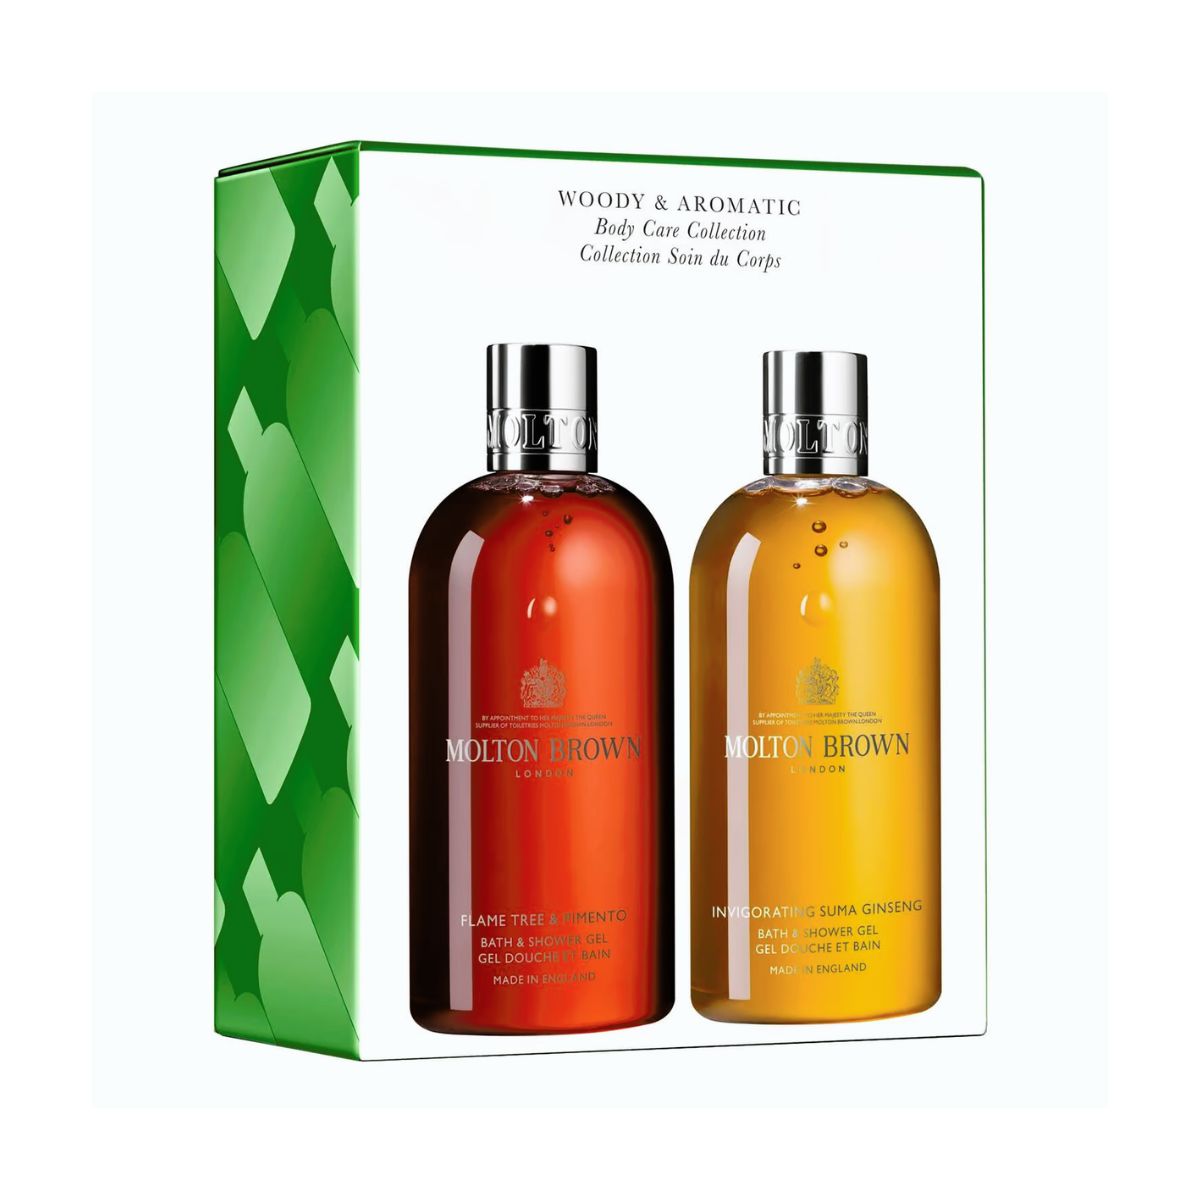 Molton Brown Woody & Aromatic Body Care Collection SAVE 32%